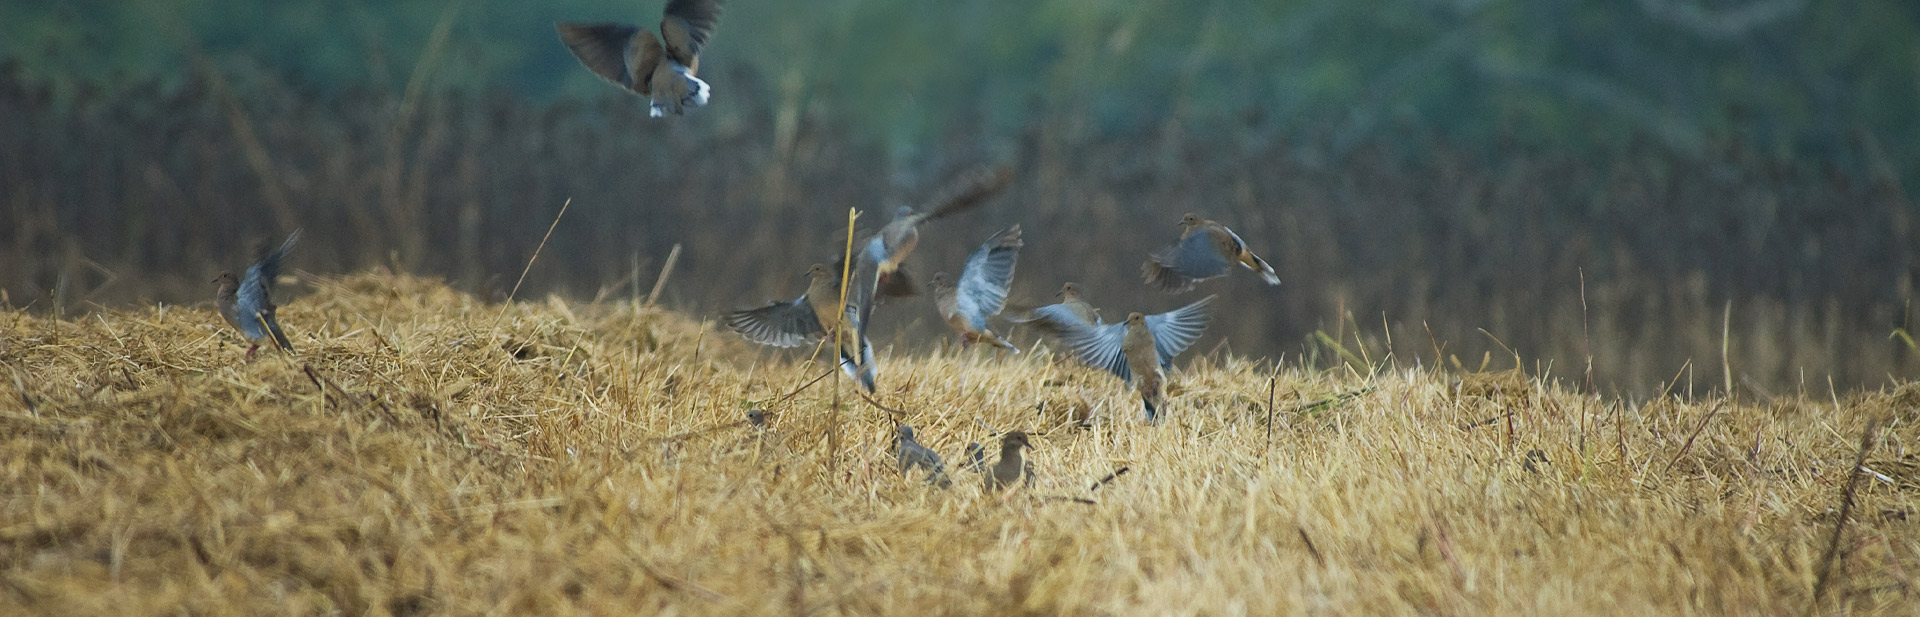 Flock of Doves in a Field Banner image